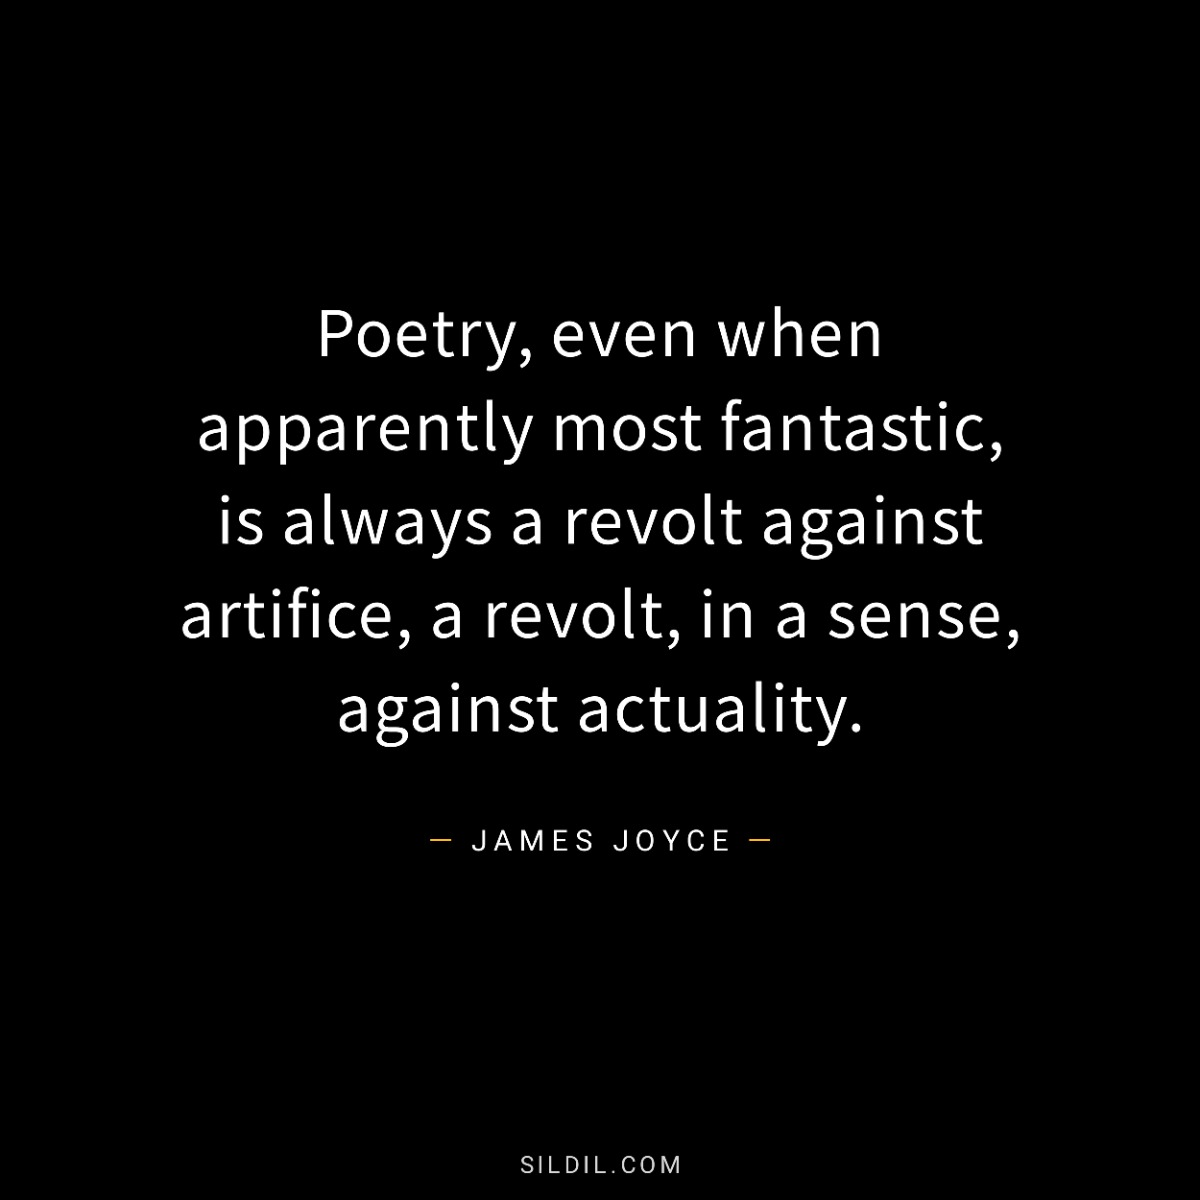 Poetry, even when apparently most fantastic, is always a revolt against artifice, a revolt, in a sense, against actuality.